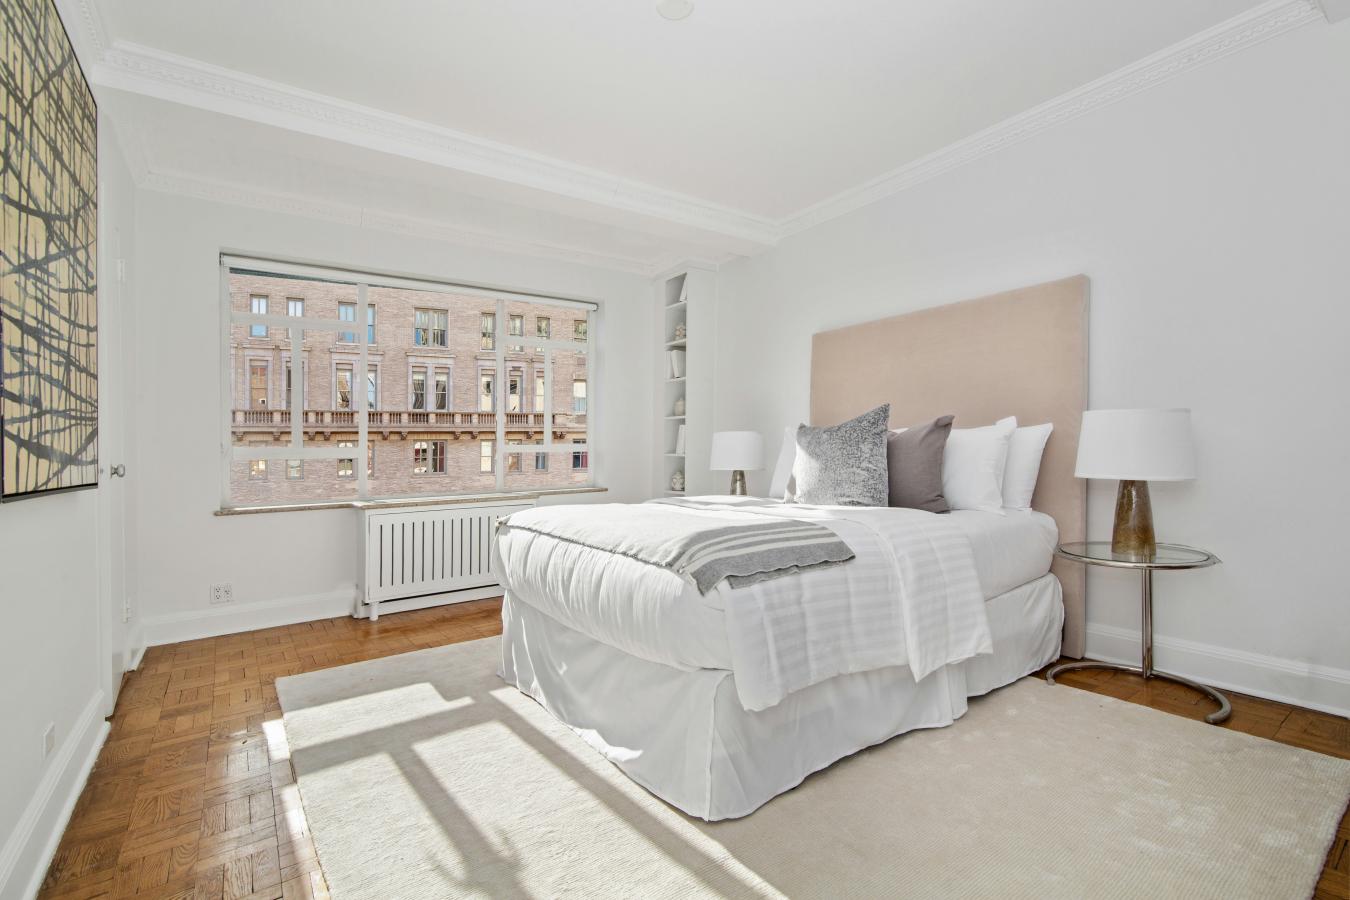 750 Park Avenue, New York, New York, 10021, United States, 2 Bedrooms Bedrooms, ,2 BathroomsBathrooms,Residential,For Sale,750 Park Avenue,1484571